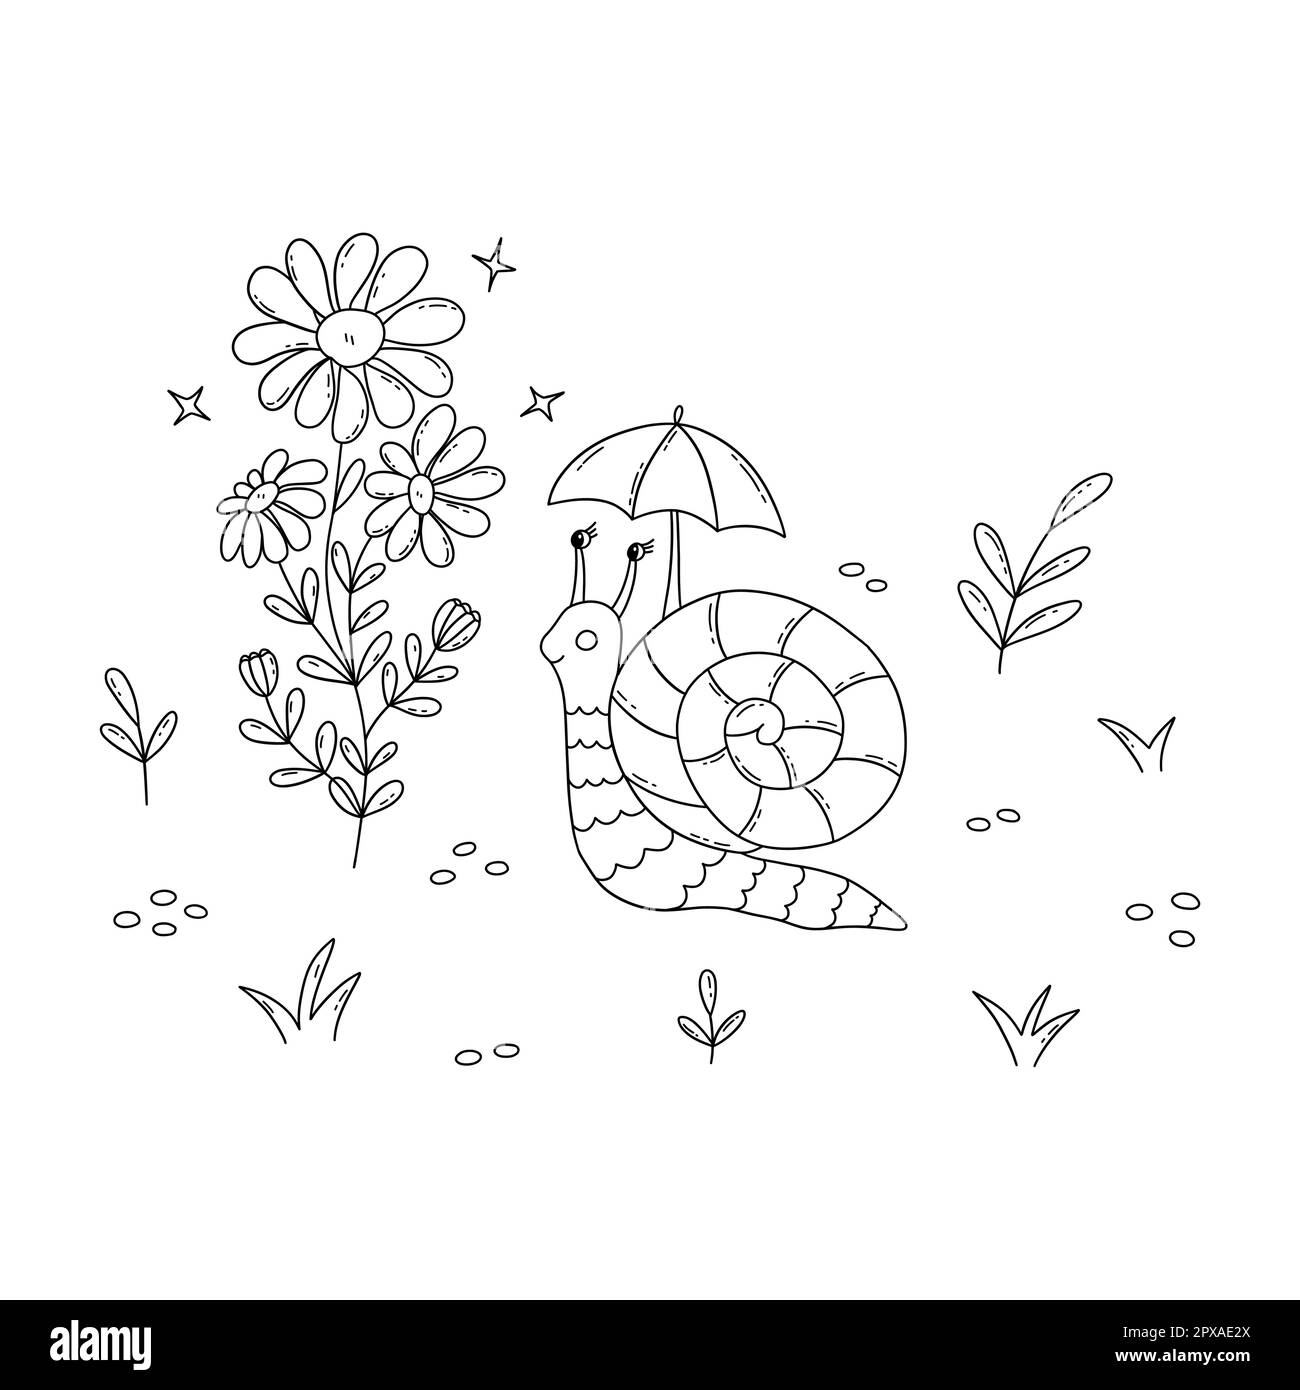 Snail in field next to sprig of chamomile. Clam with striped shell and umbrella over head. Black and white vector isolated illustration hand drawn. Sp Stock Vector